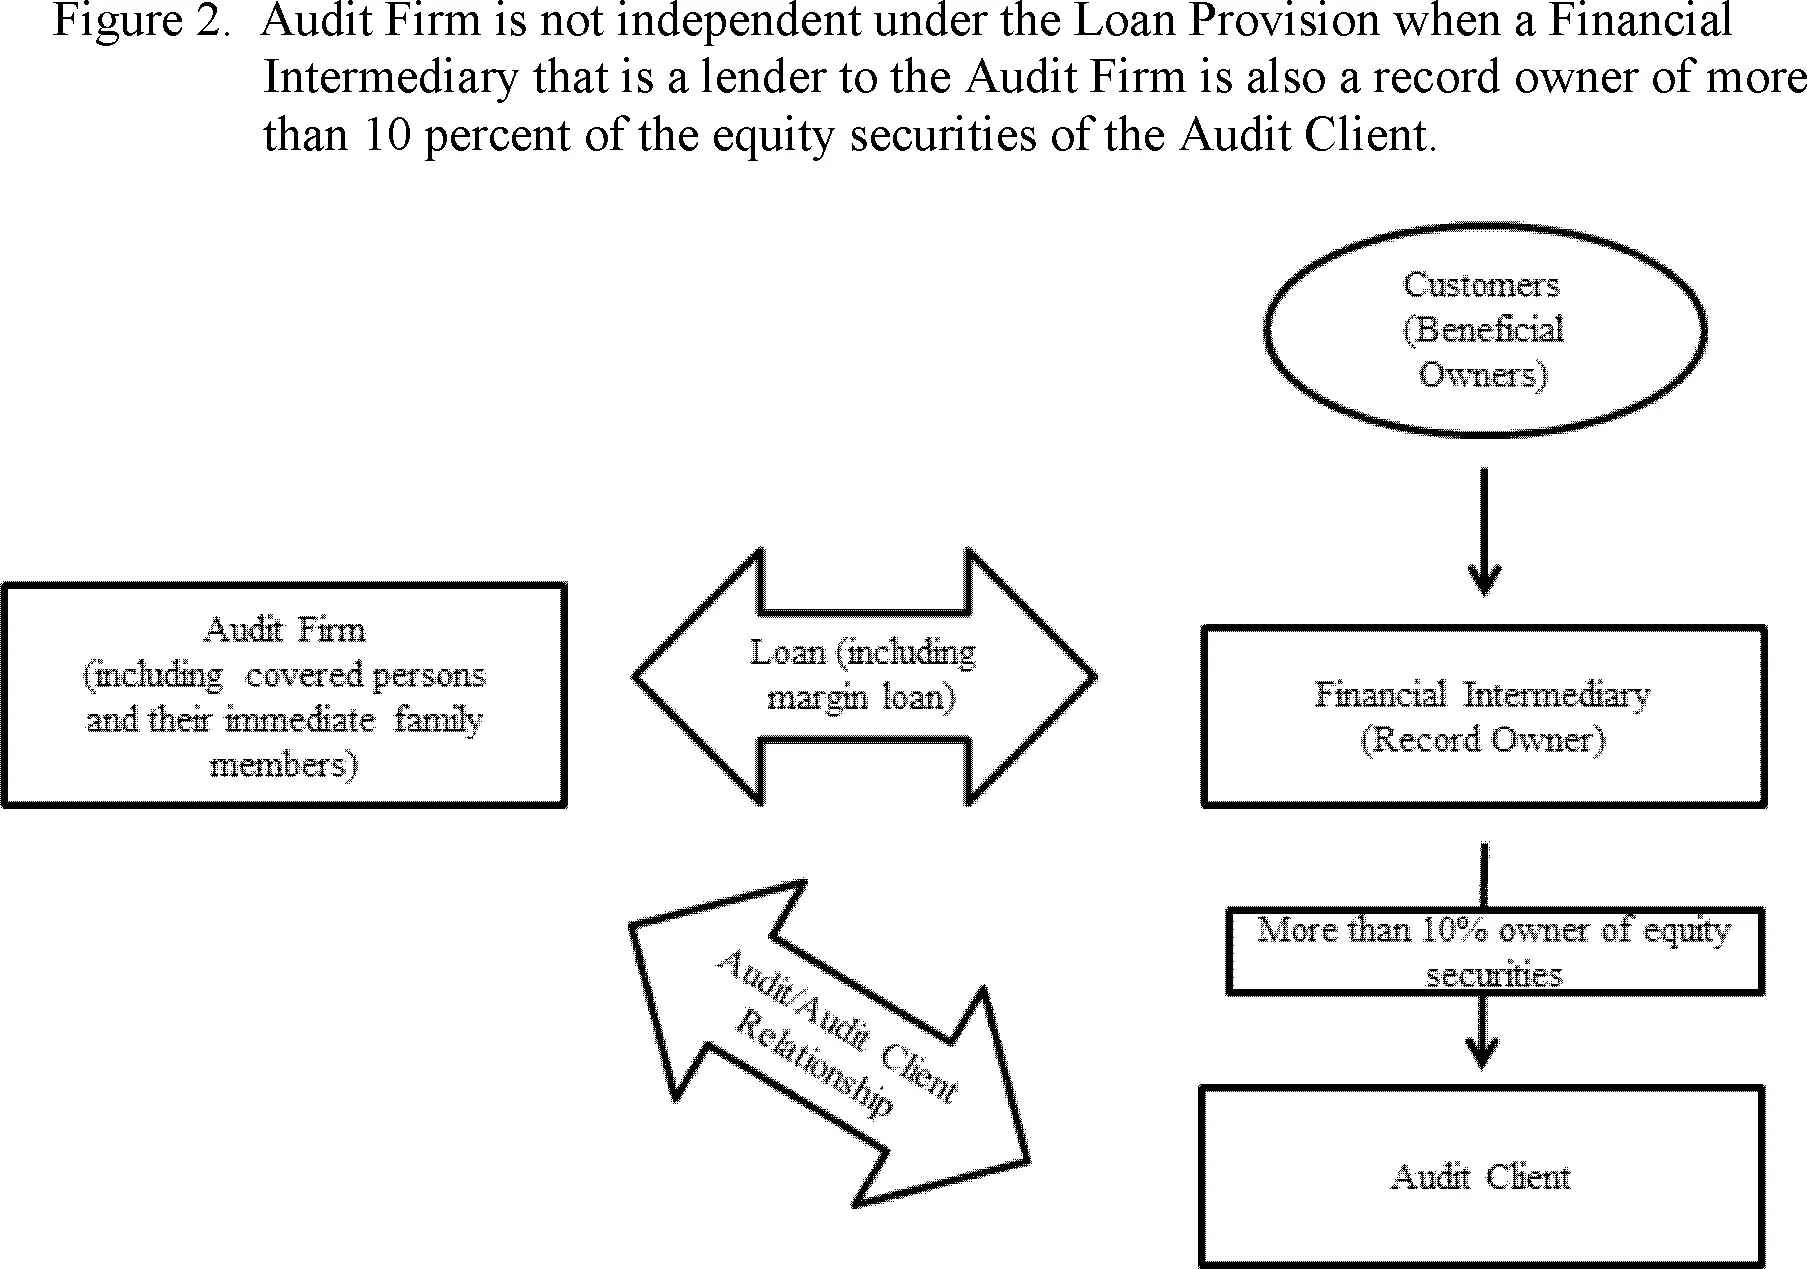 sec loan rule auditor independence - What is the SEC auditor independence loan rule